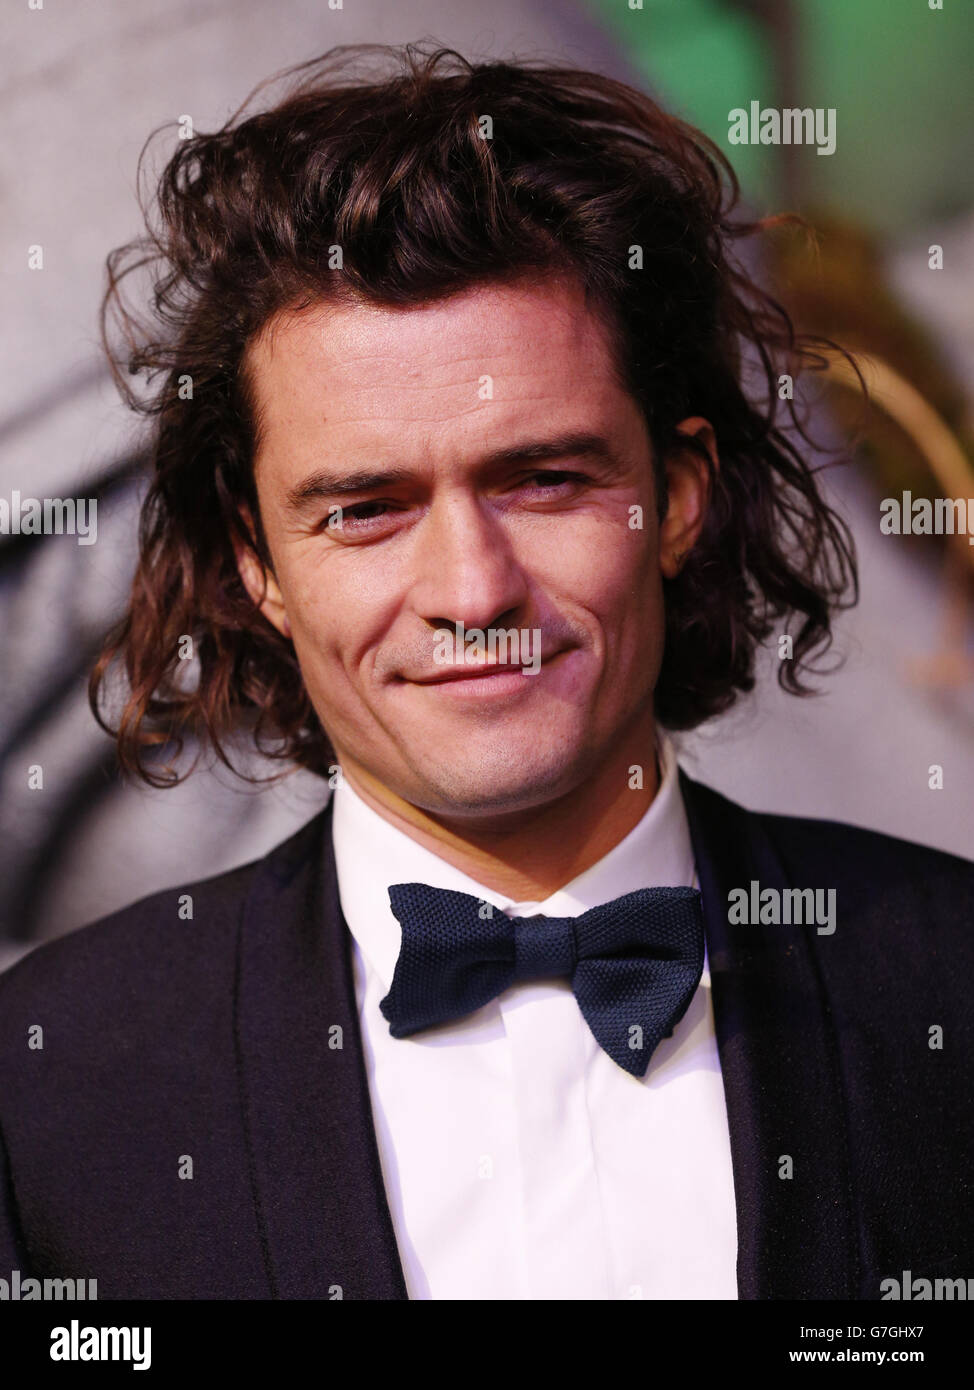 Orlando Bloom arrives on the green carpet for the premiere of The Hobbit: Battle of the Five Armies, at the Odeon Leicester Square in central London. Stock Photo